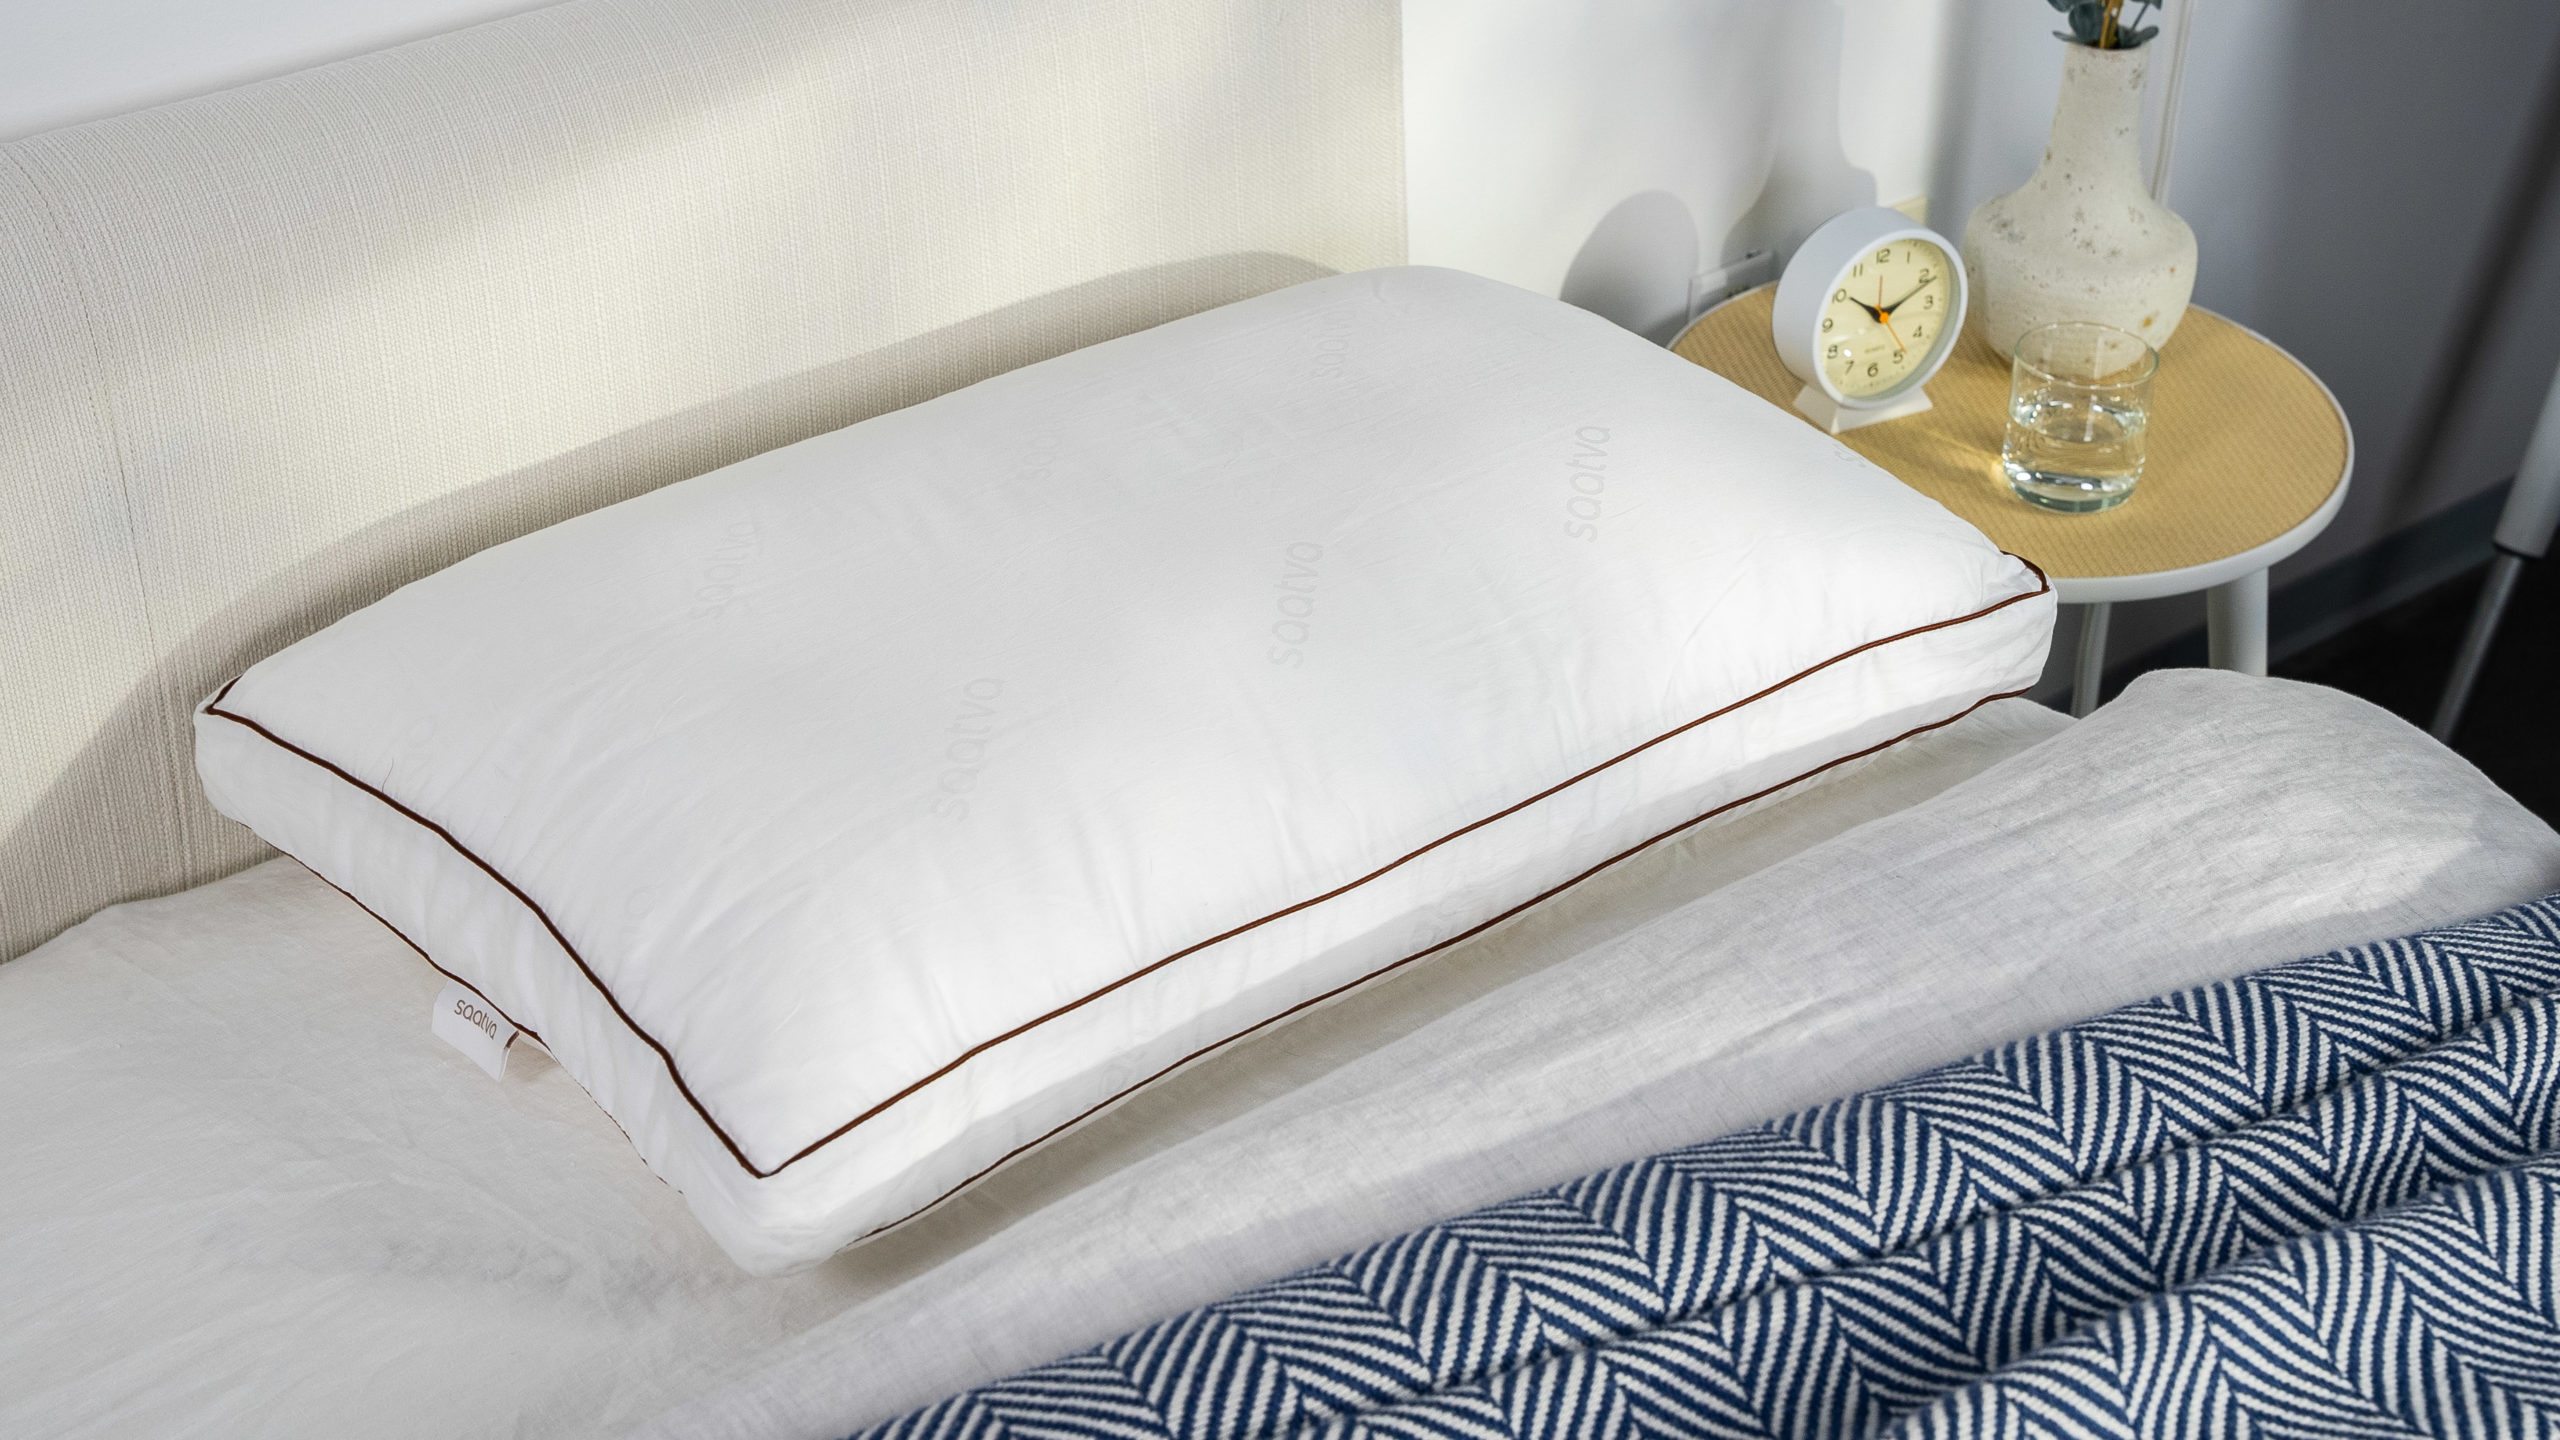 Elderly Bed Roll Over U Pillow Supports Cleaning up Patients